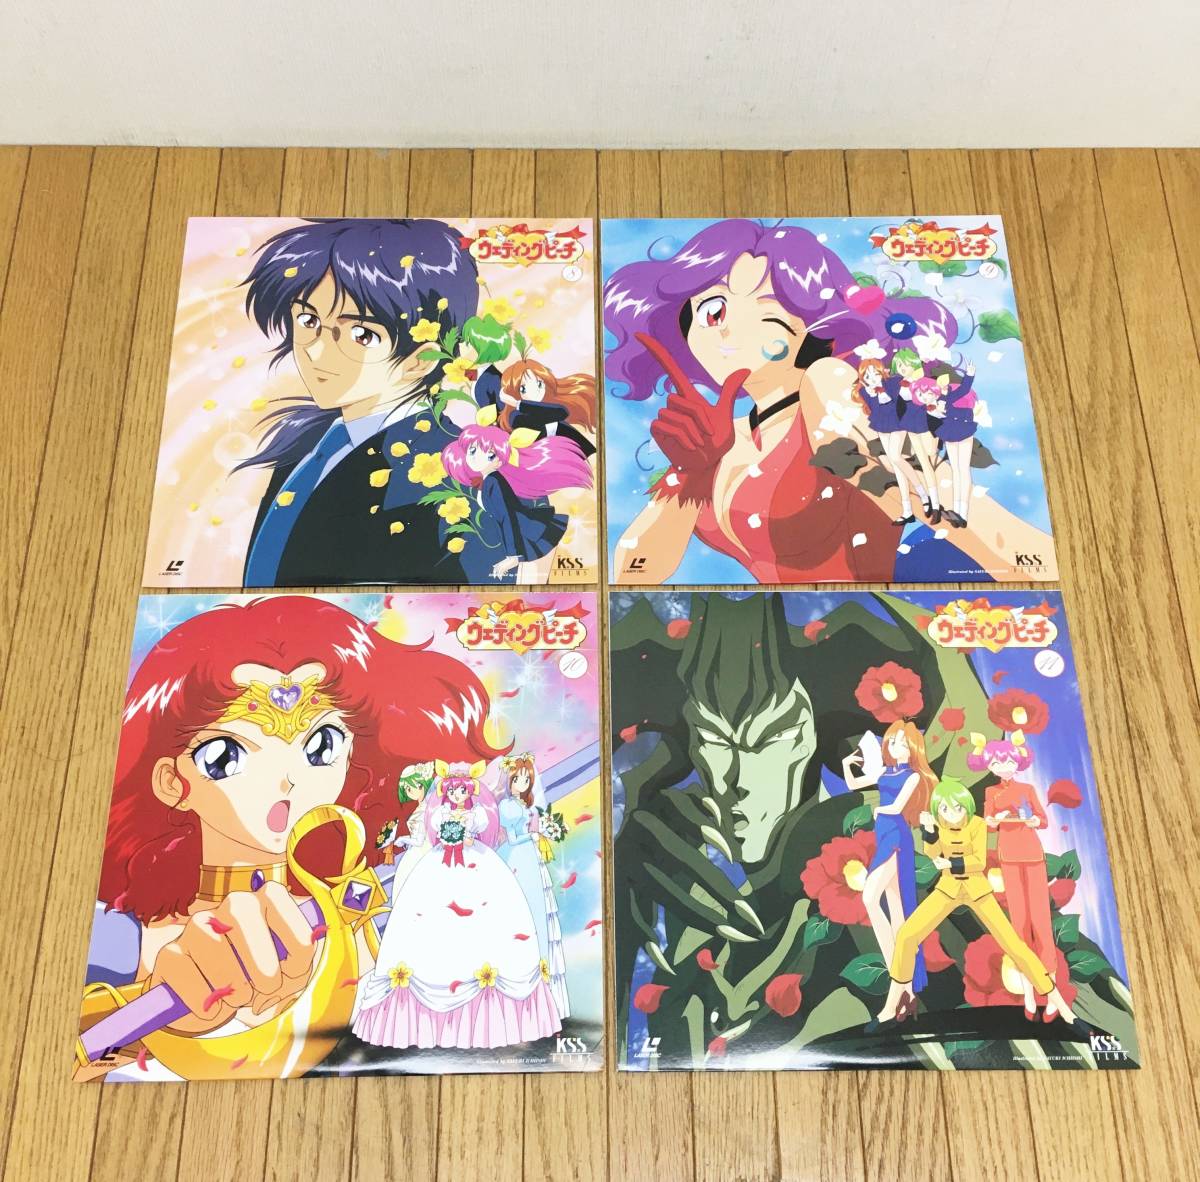  Wedding Peach /LD BOX/ front compilation after compilation set / poster * autograph square fancy cardboard gorgeous with special favor / laser disk / anime / Showa era / collection / Junk 